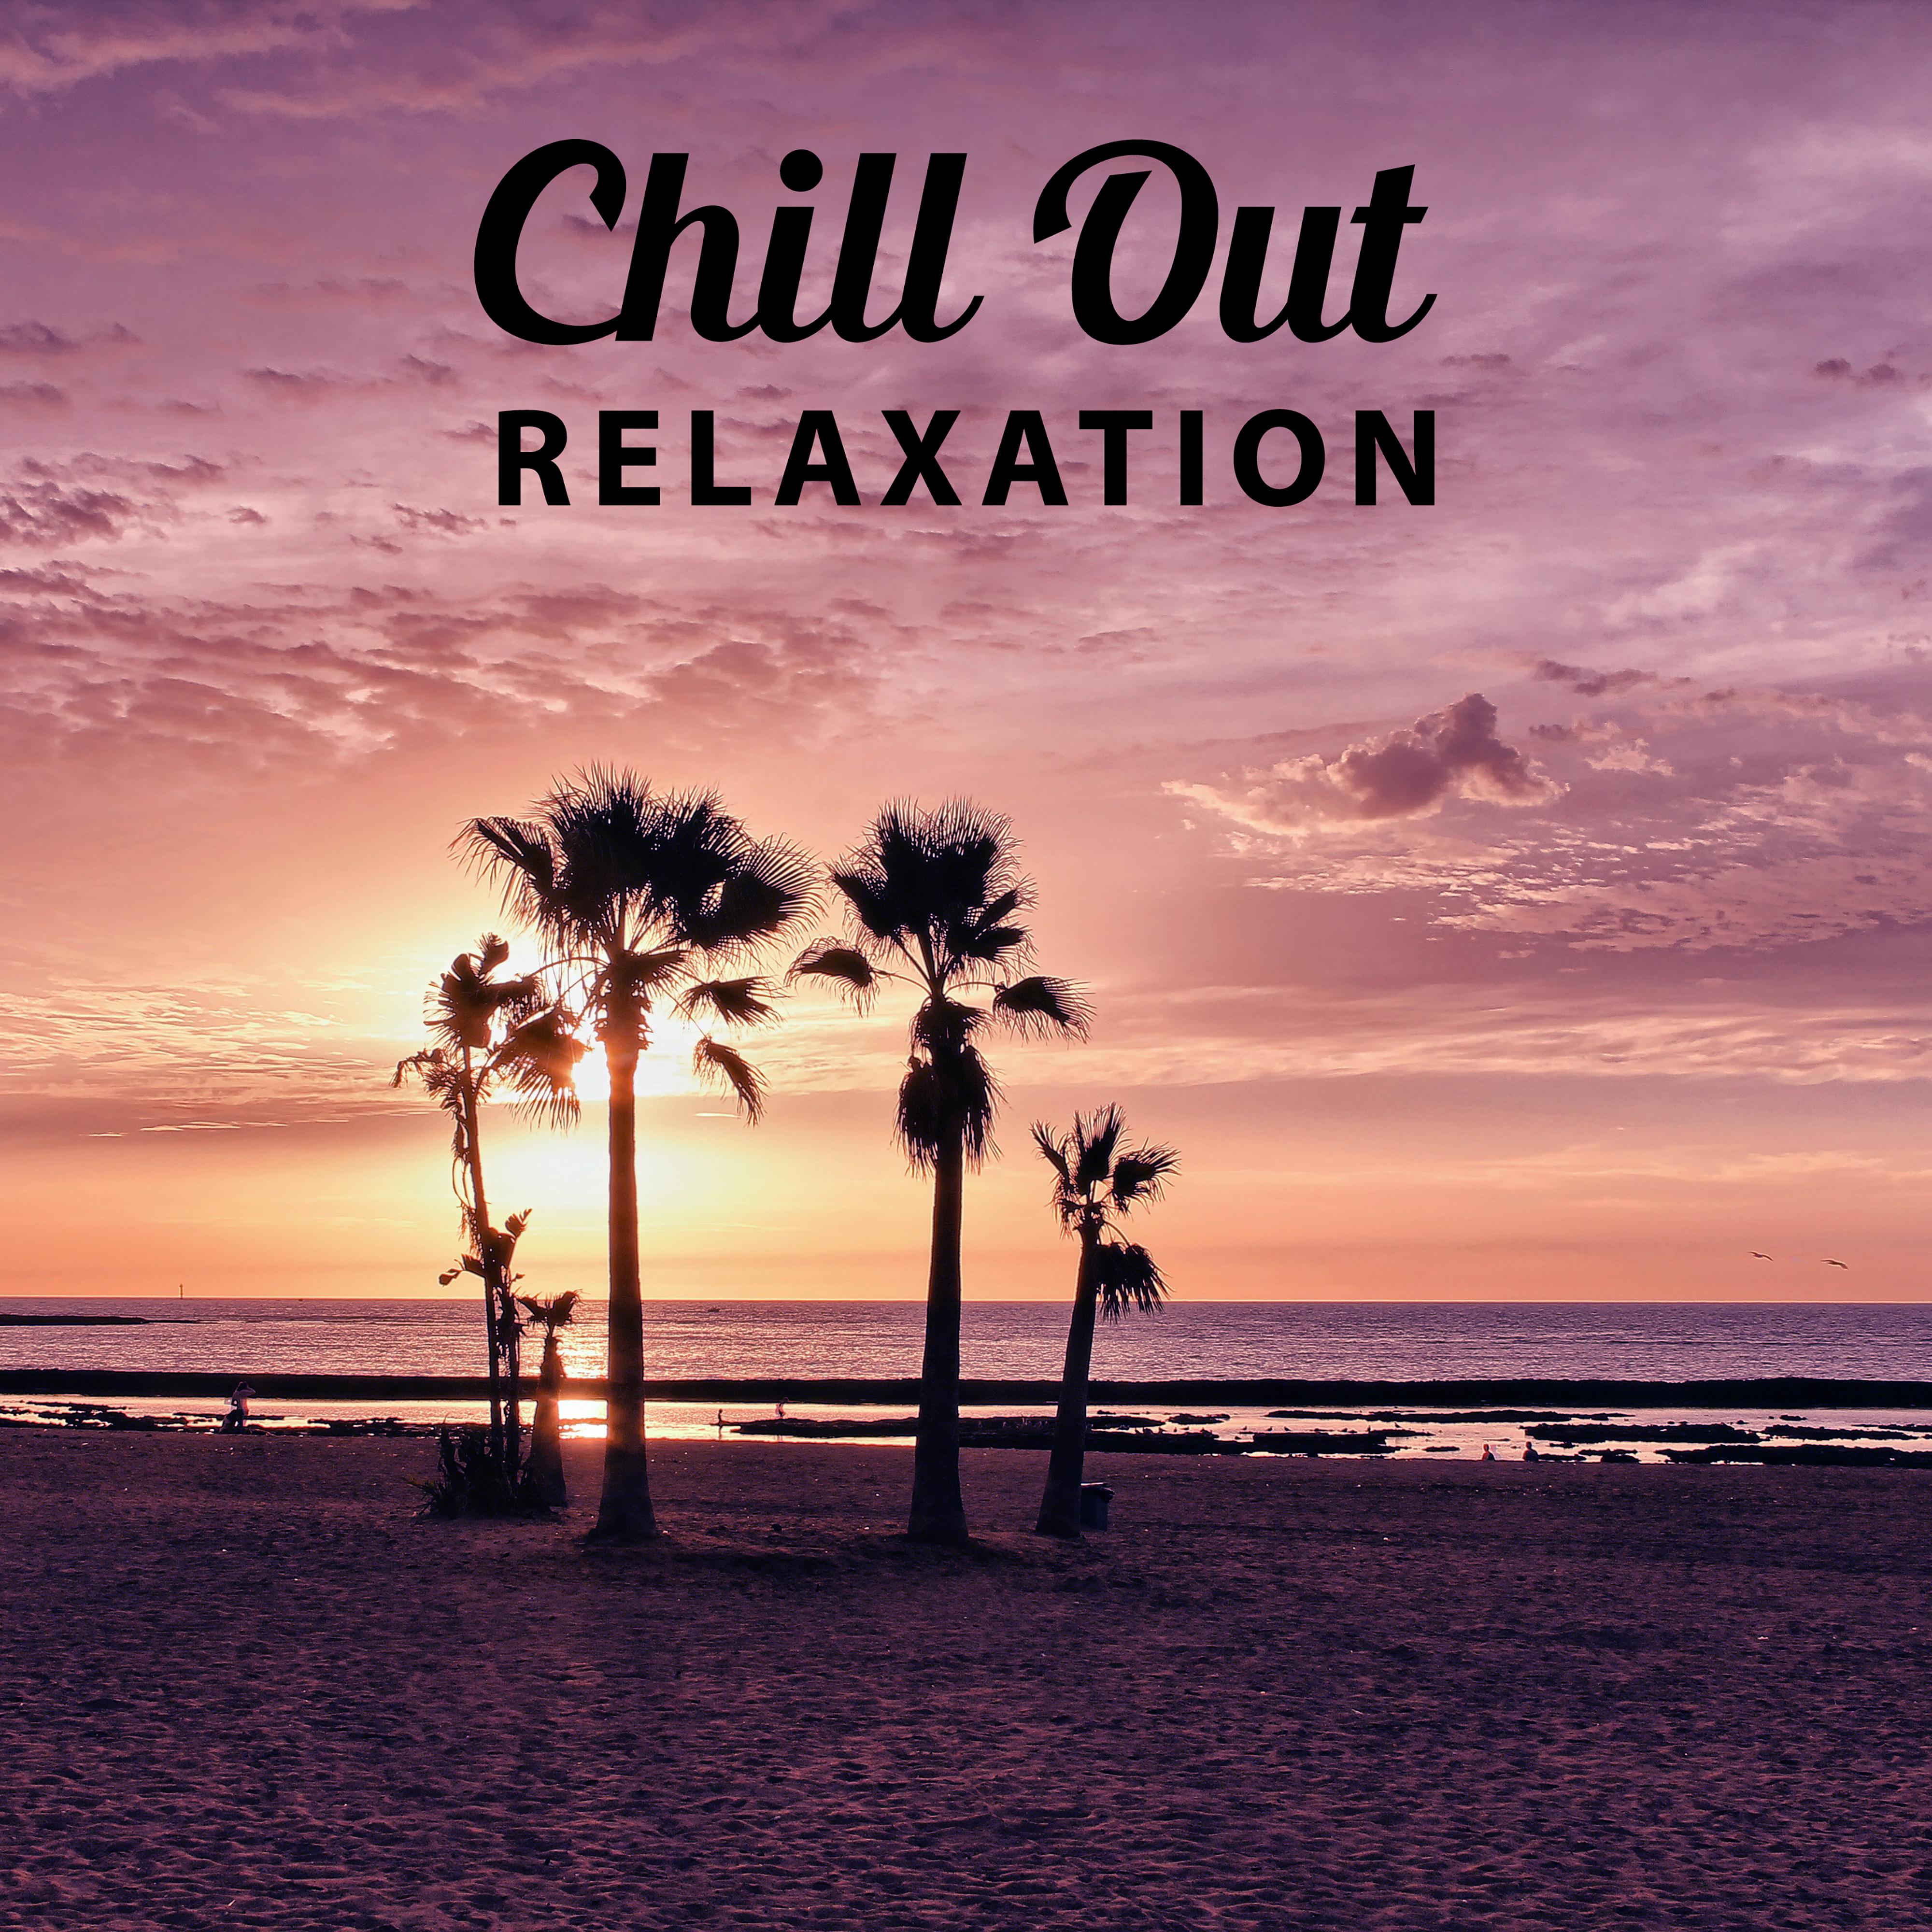 Chill Out Relaxation – Chillout Music, Peaceful Sounds, Beach House, Bar Lounge